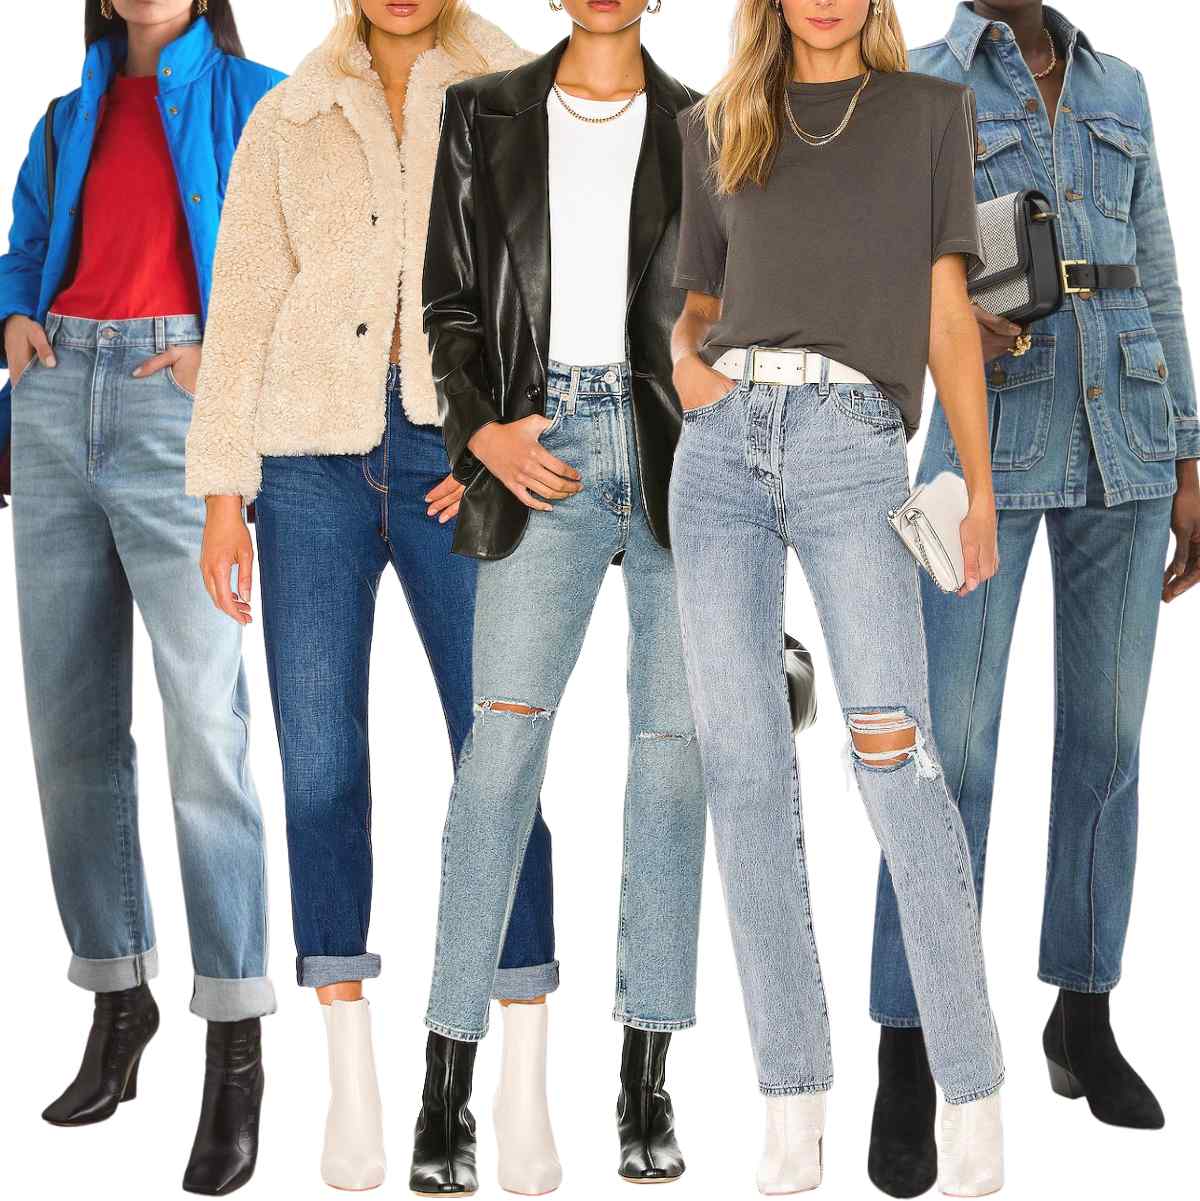 Collage of 5 women wearing ankle boot outfits with straight leg jeans.